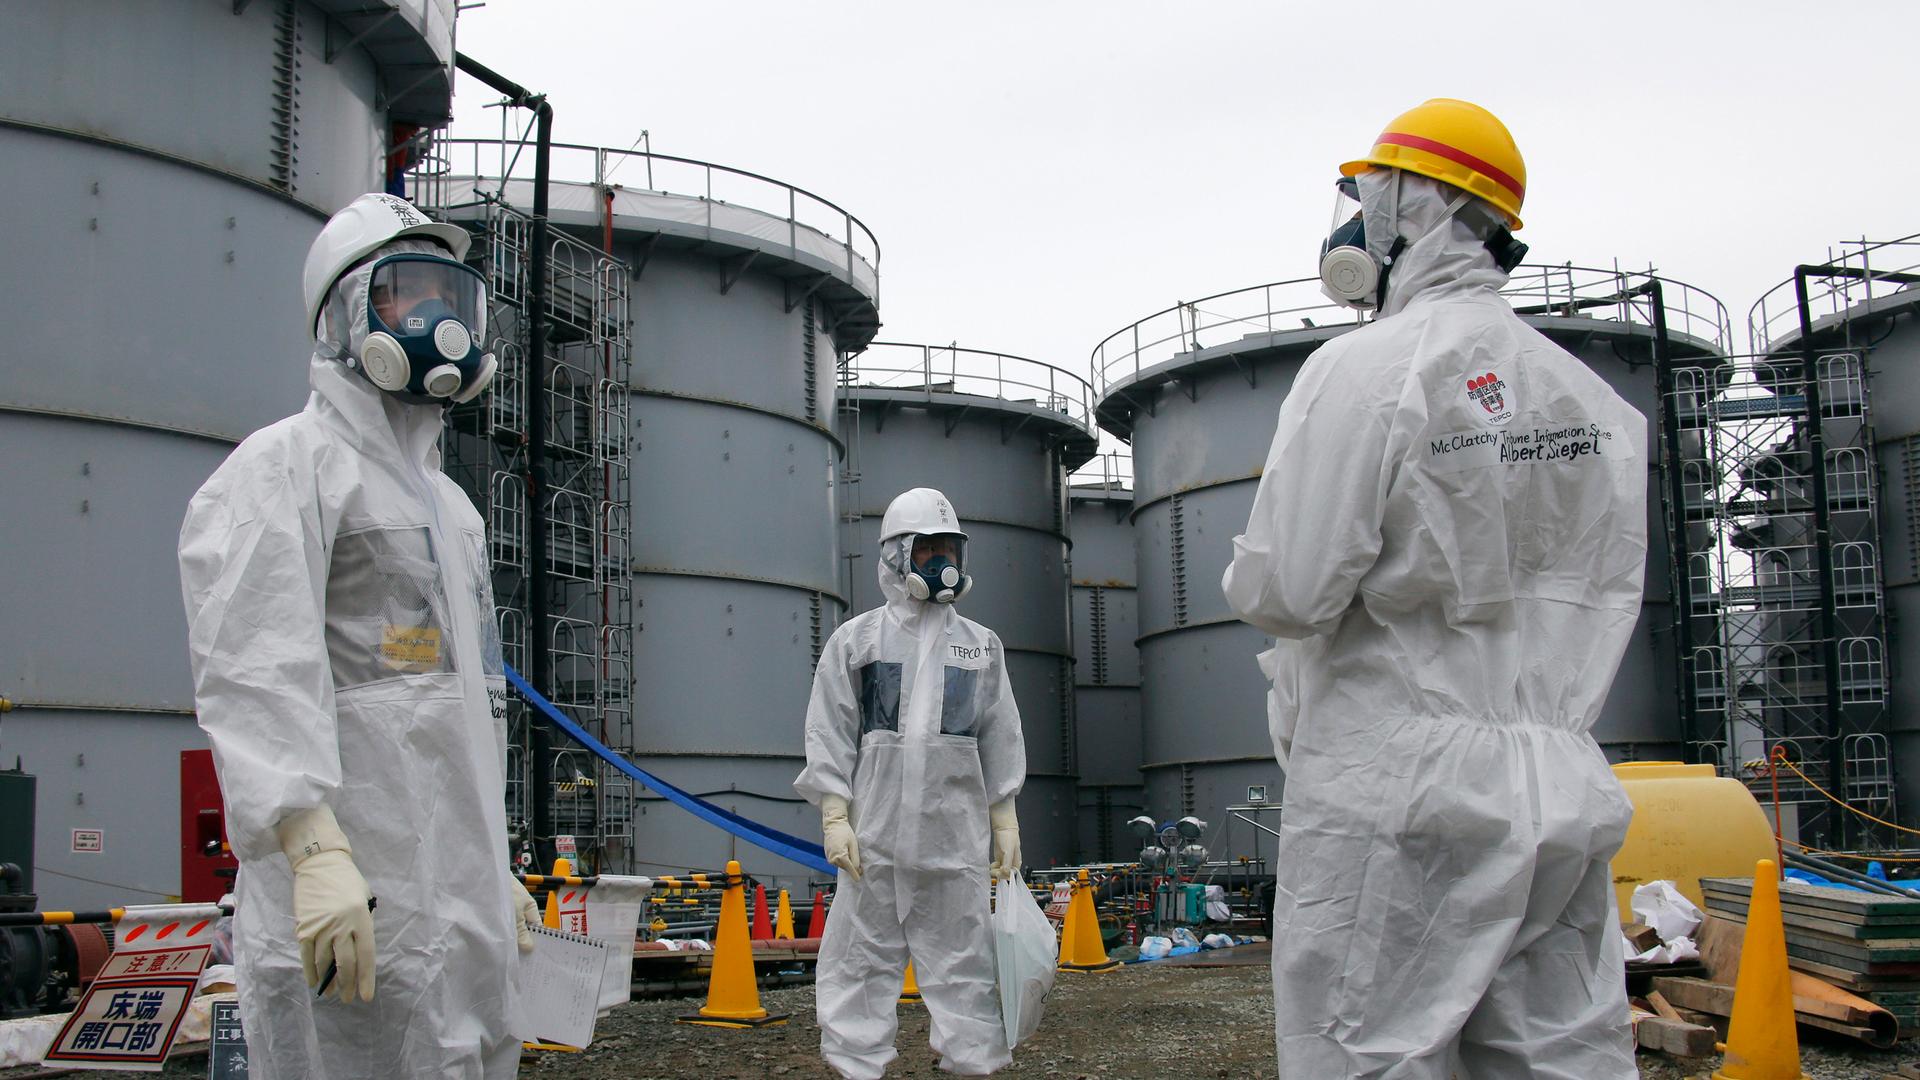 A Tokyo Electric Power Corp (TEPCO) official and journalists wearing protective equipment stand near storage tanks for radioactive water at Japan's tsunami-crippled Fukushima Daiichi nuclear power plant in November, 2013. A team of Japanese scientists say